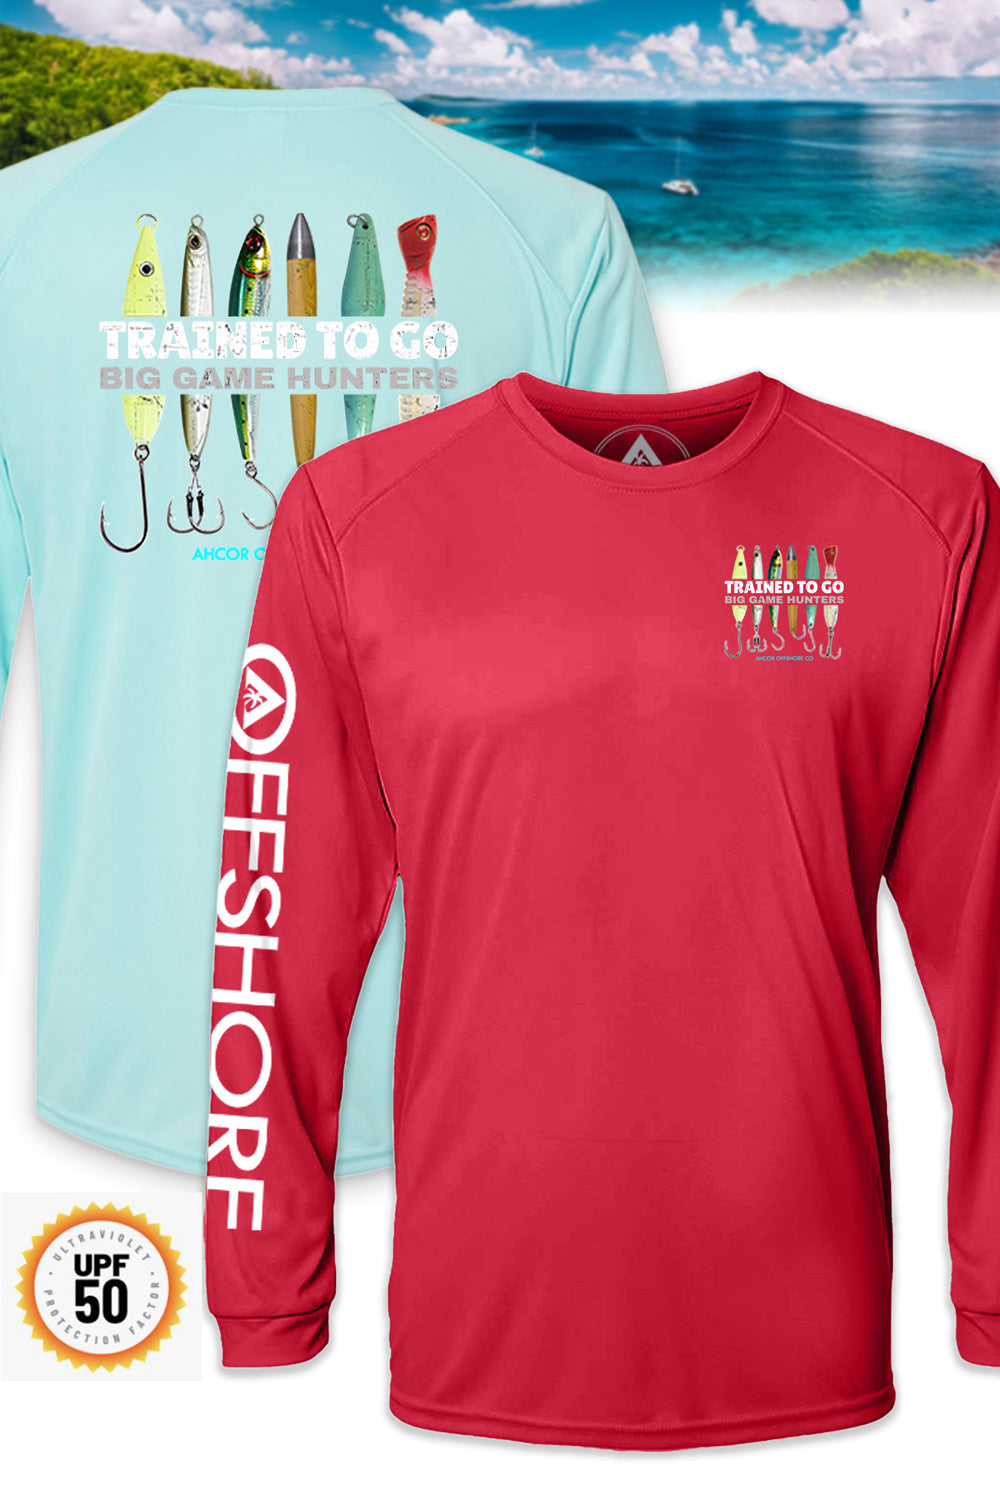 Trained to Go - Performance Long Sleeve (50+ Upf) 2X-Large / Mint Green